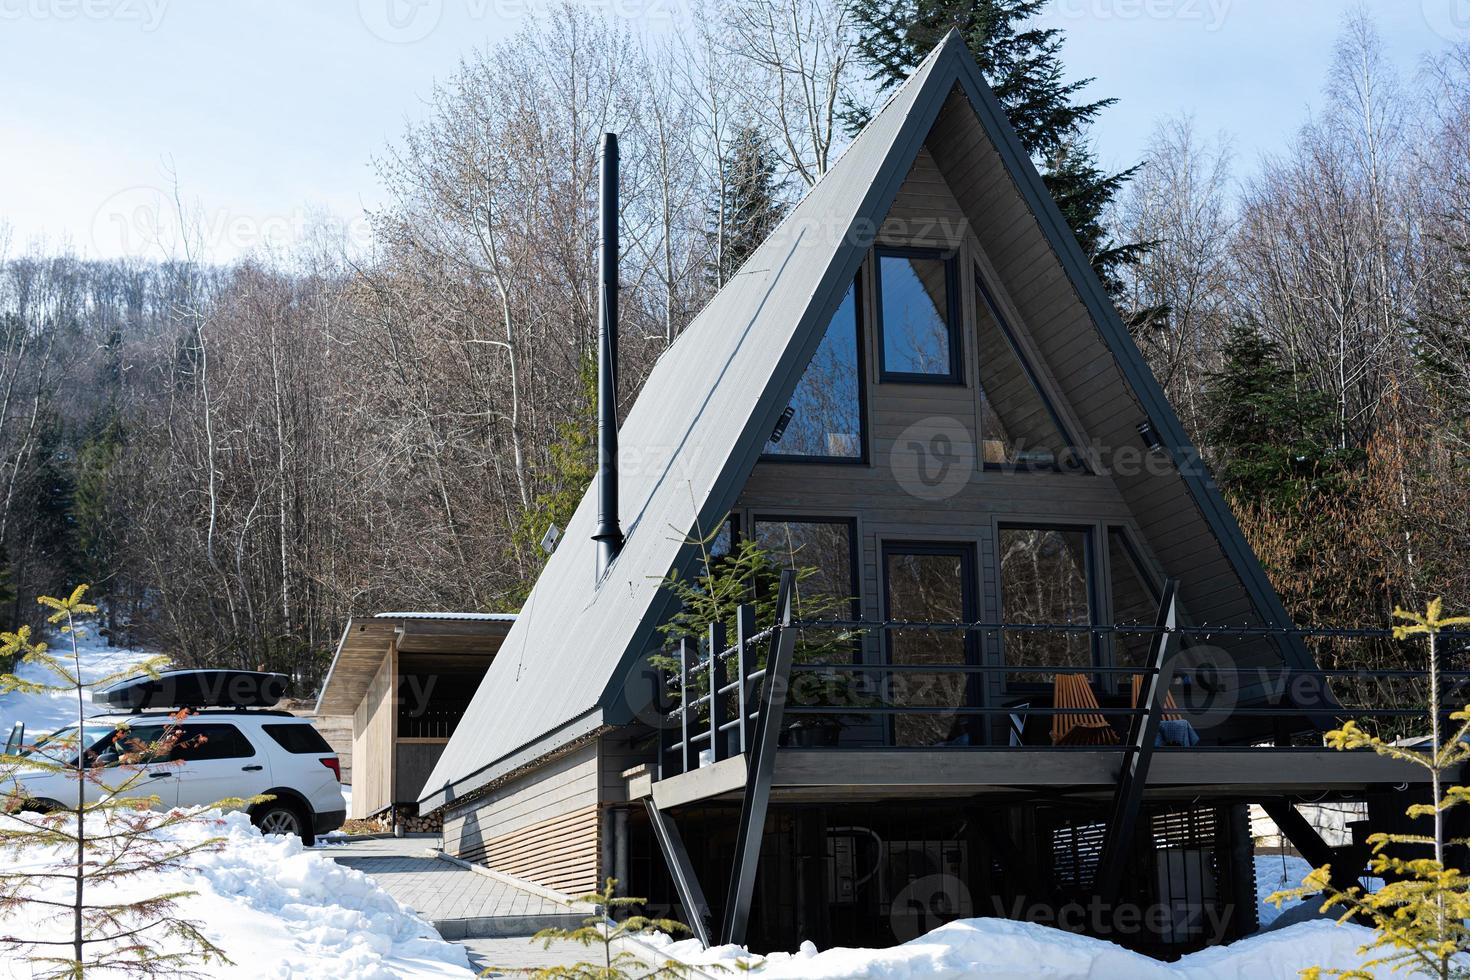 Wooden triangle country tiny cabin house and suv car with roof rack in mountains. Soul weekends. photo